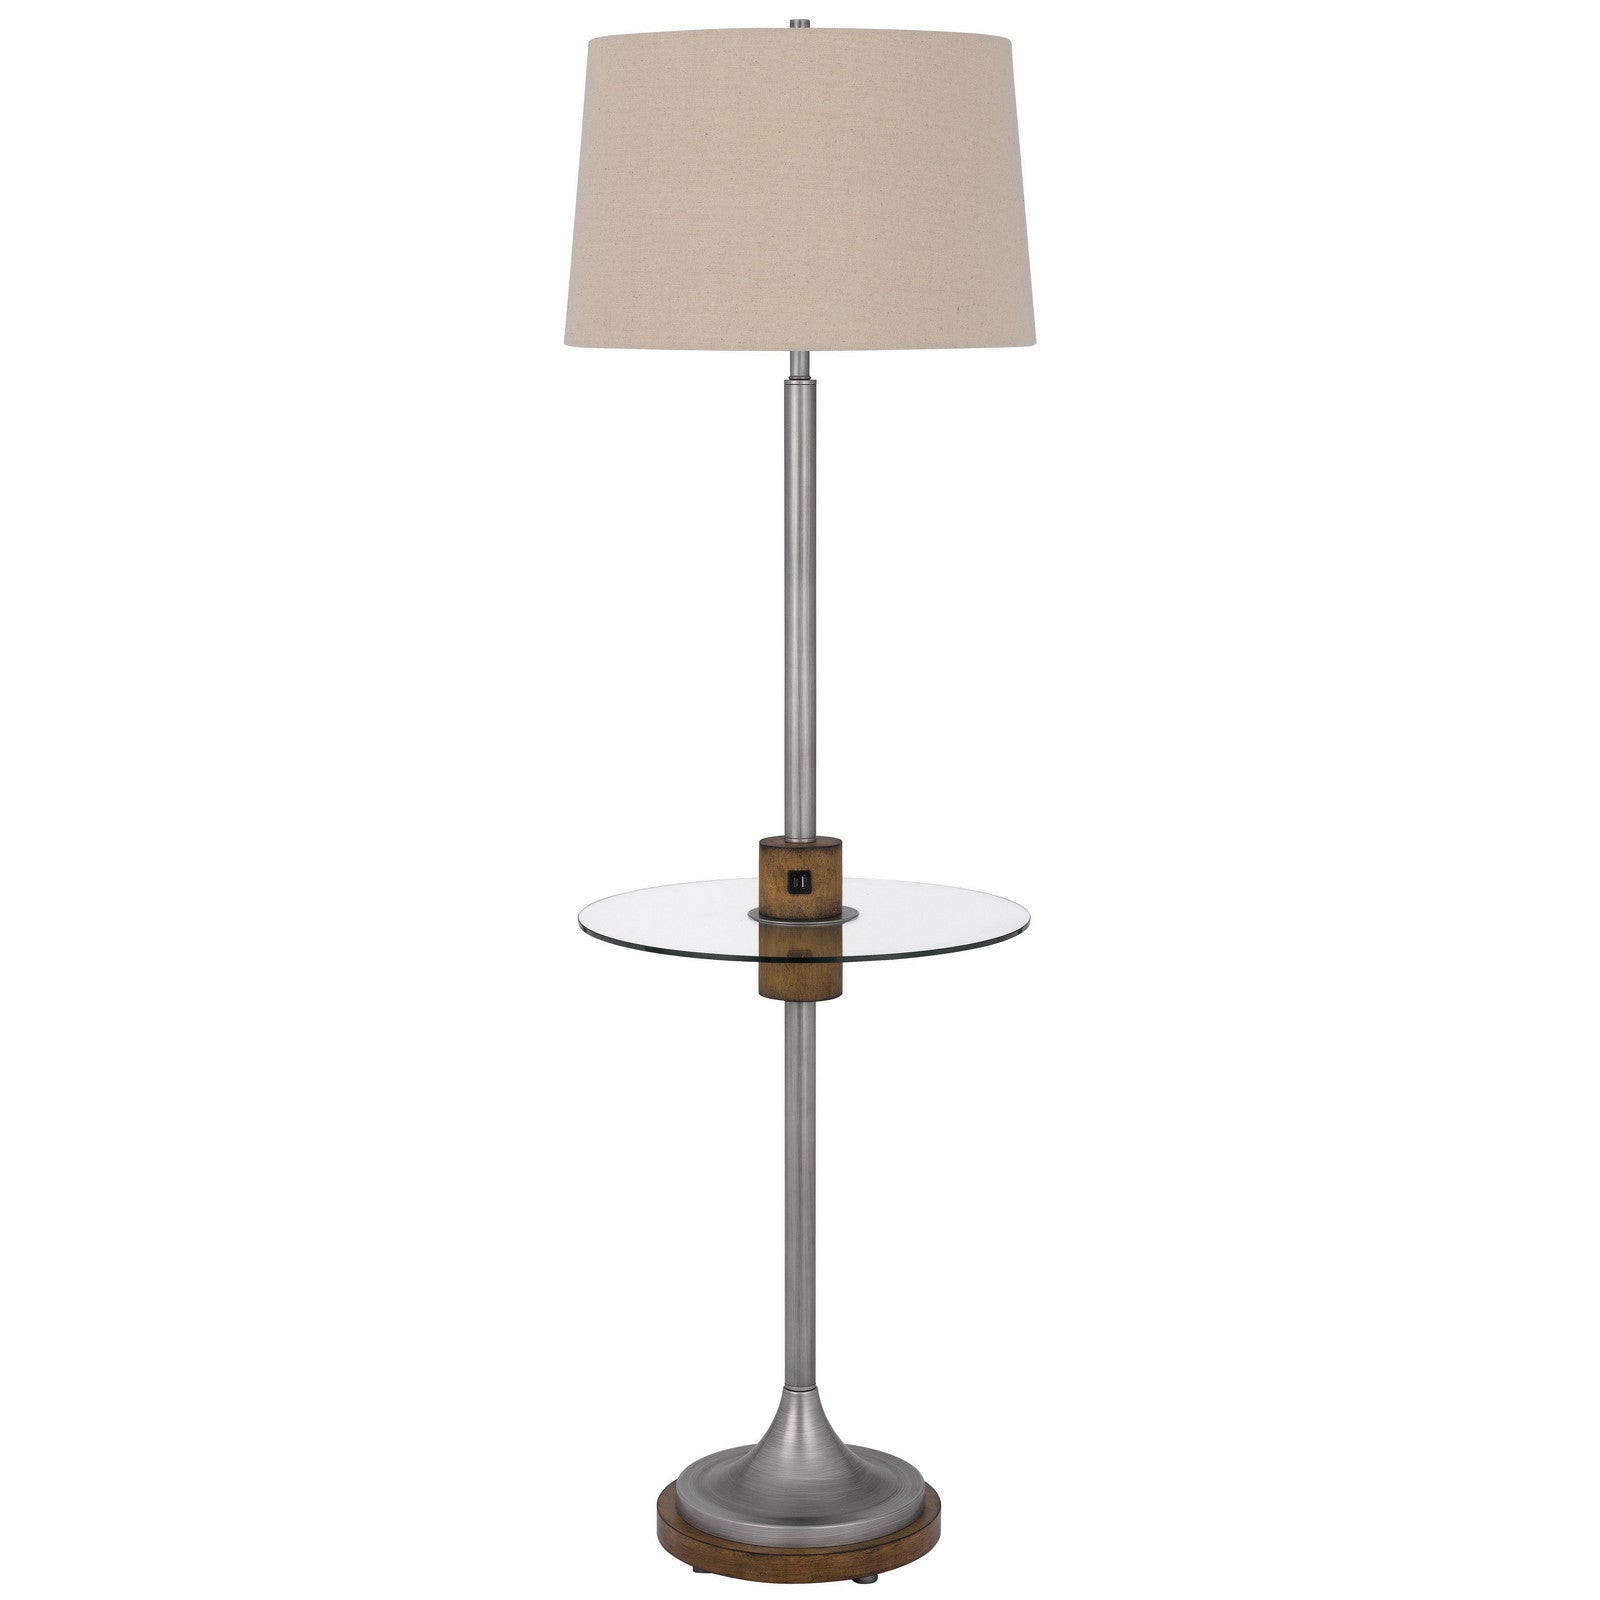 61" Pewter Tray Table Floor Lamp With Beige Transparent Glass Square Shade